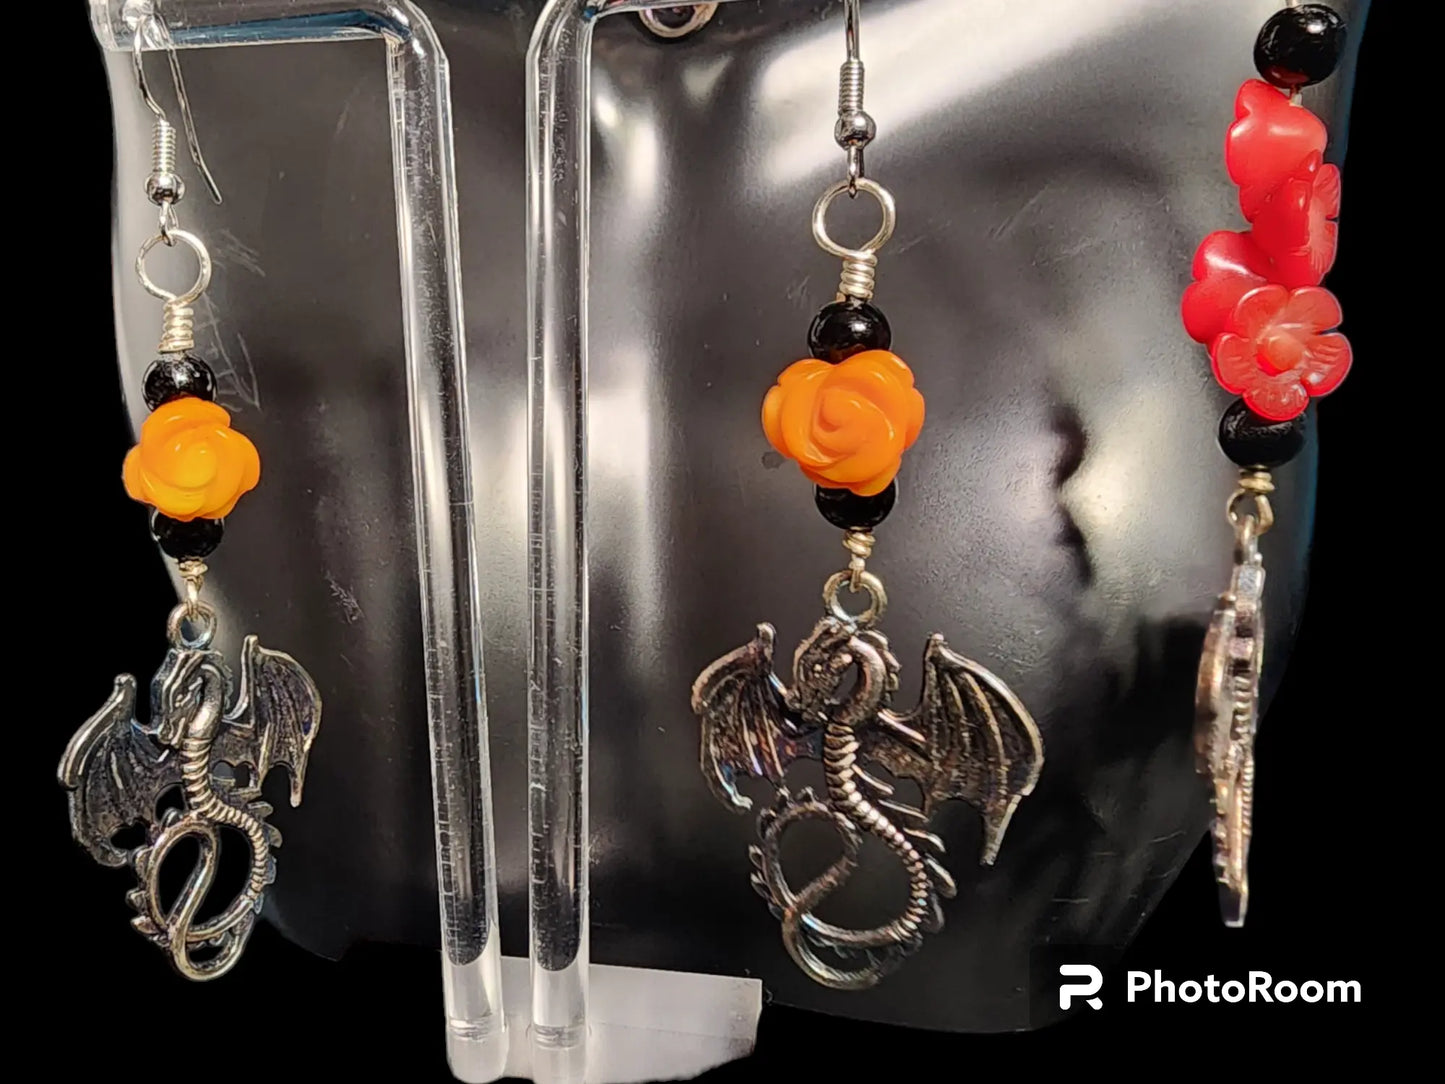 Dragon Earrings Bead From The Heart Creations